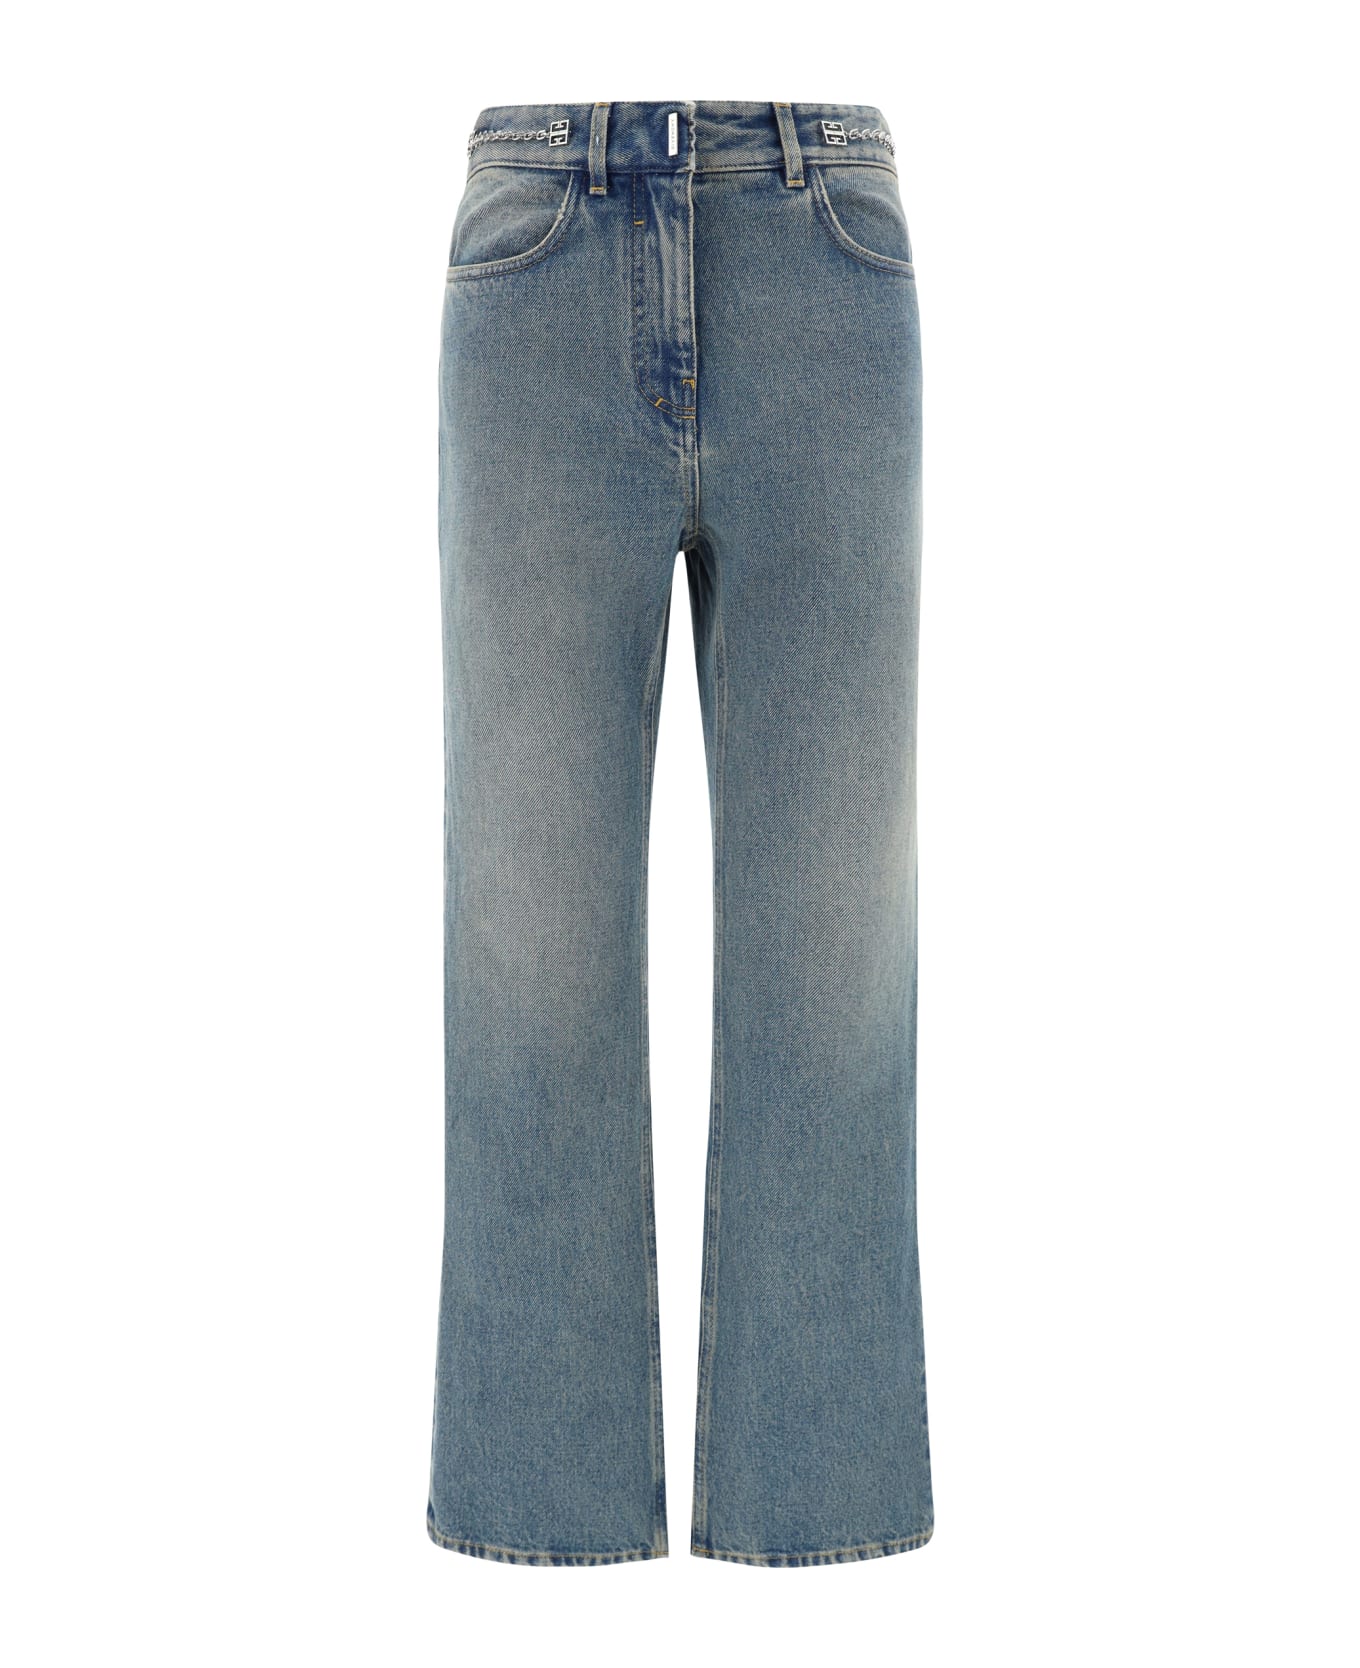 Givenchy Boot Cut Jeans - Blue デニム